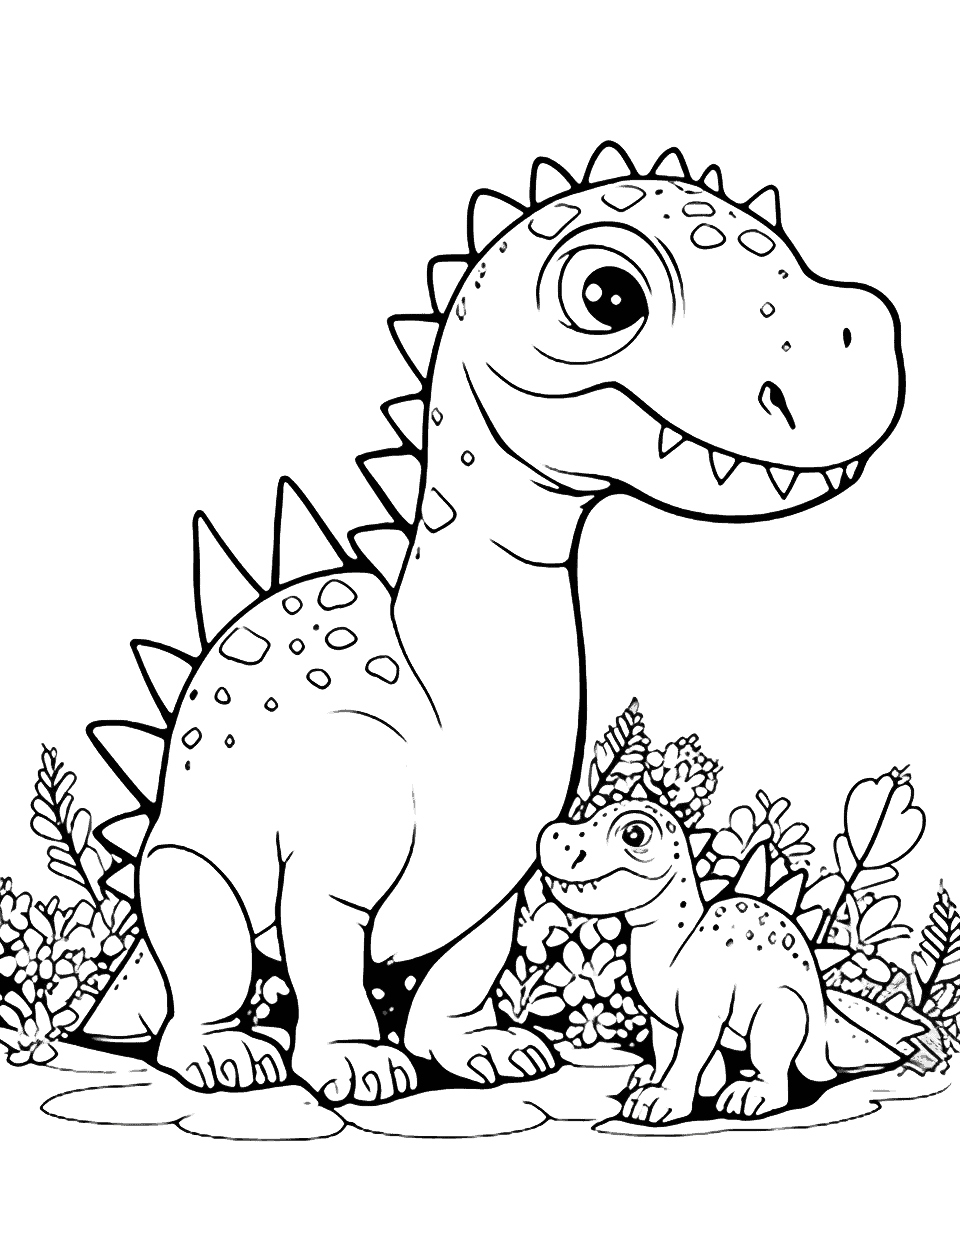 Baby Dino and Parent Dinosaur Coloring Page - A baby dinosaur interacting with its parent in a touching scene.